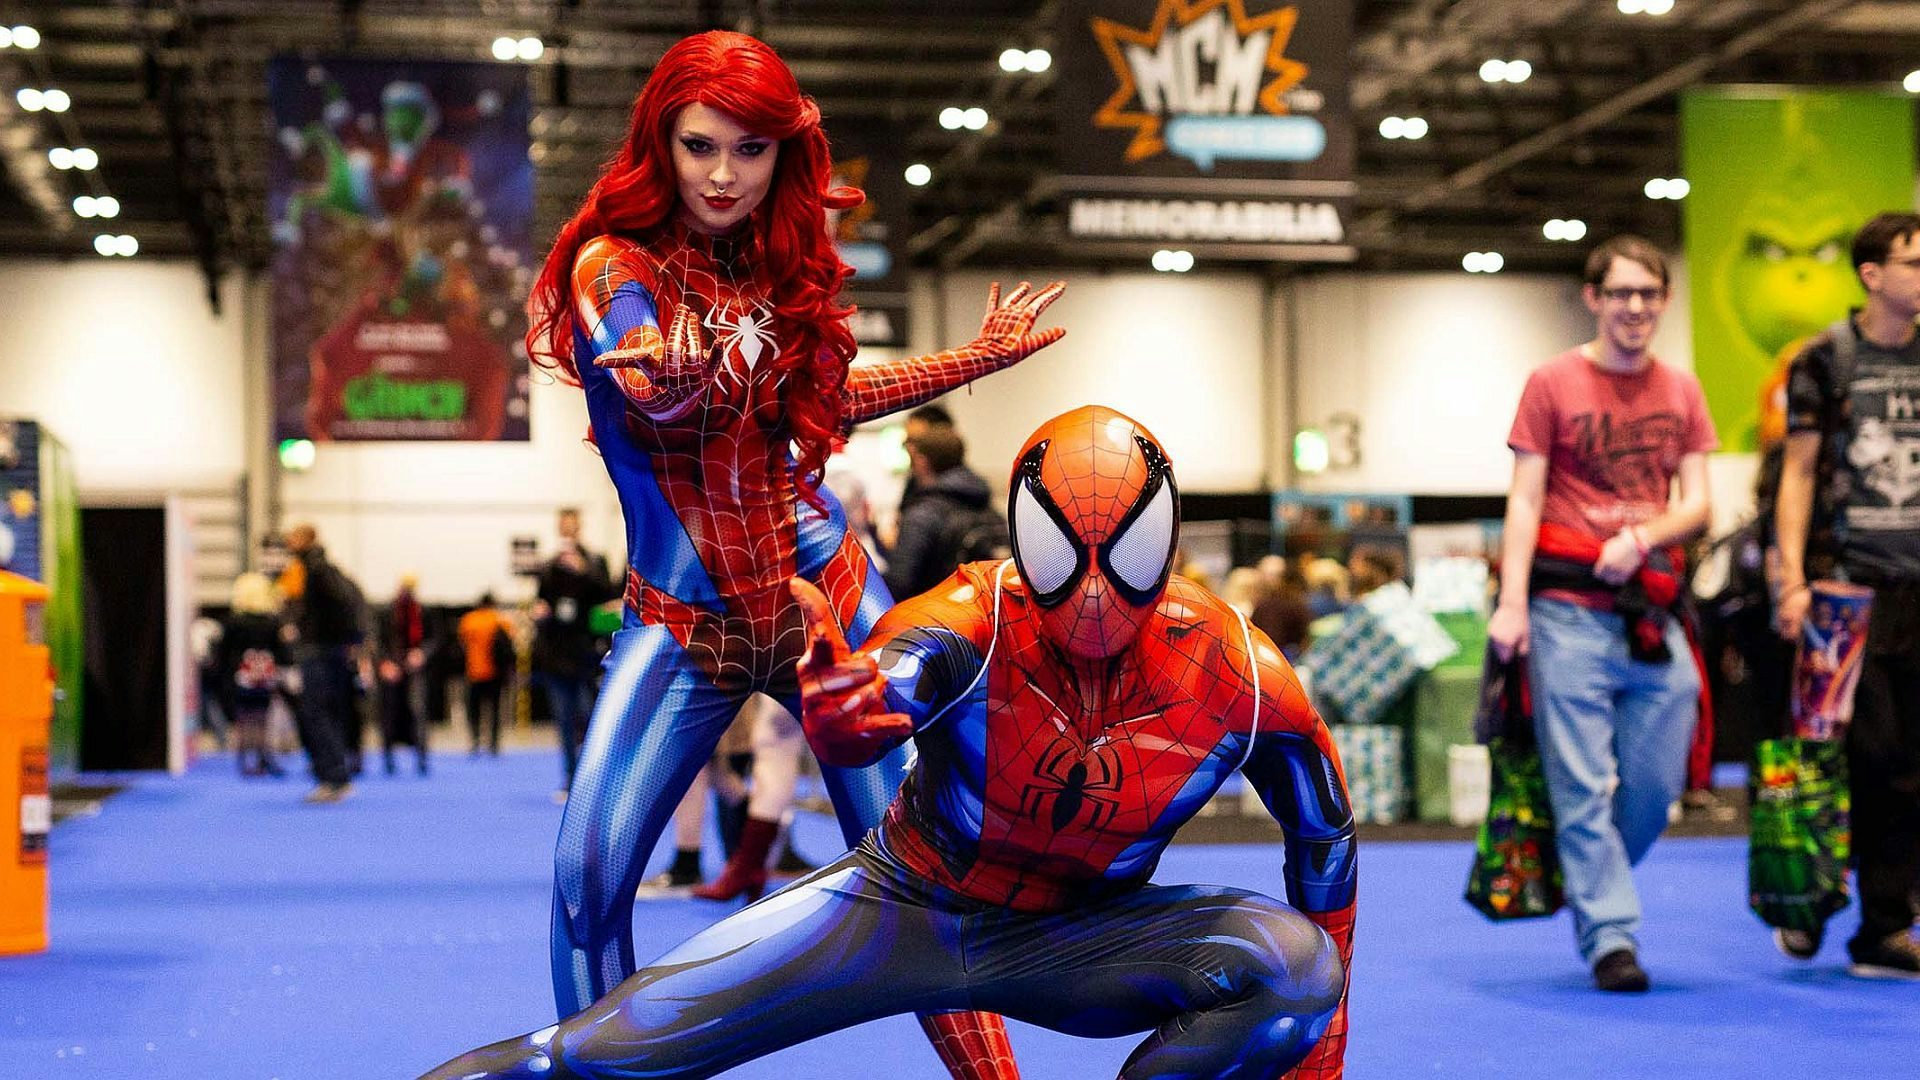 You've got an hour to spend at MCM London this weekend. What do you do and why?